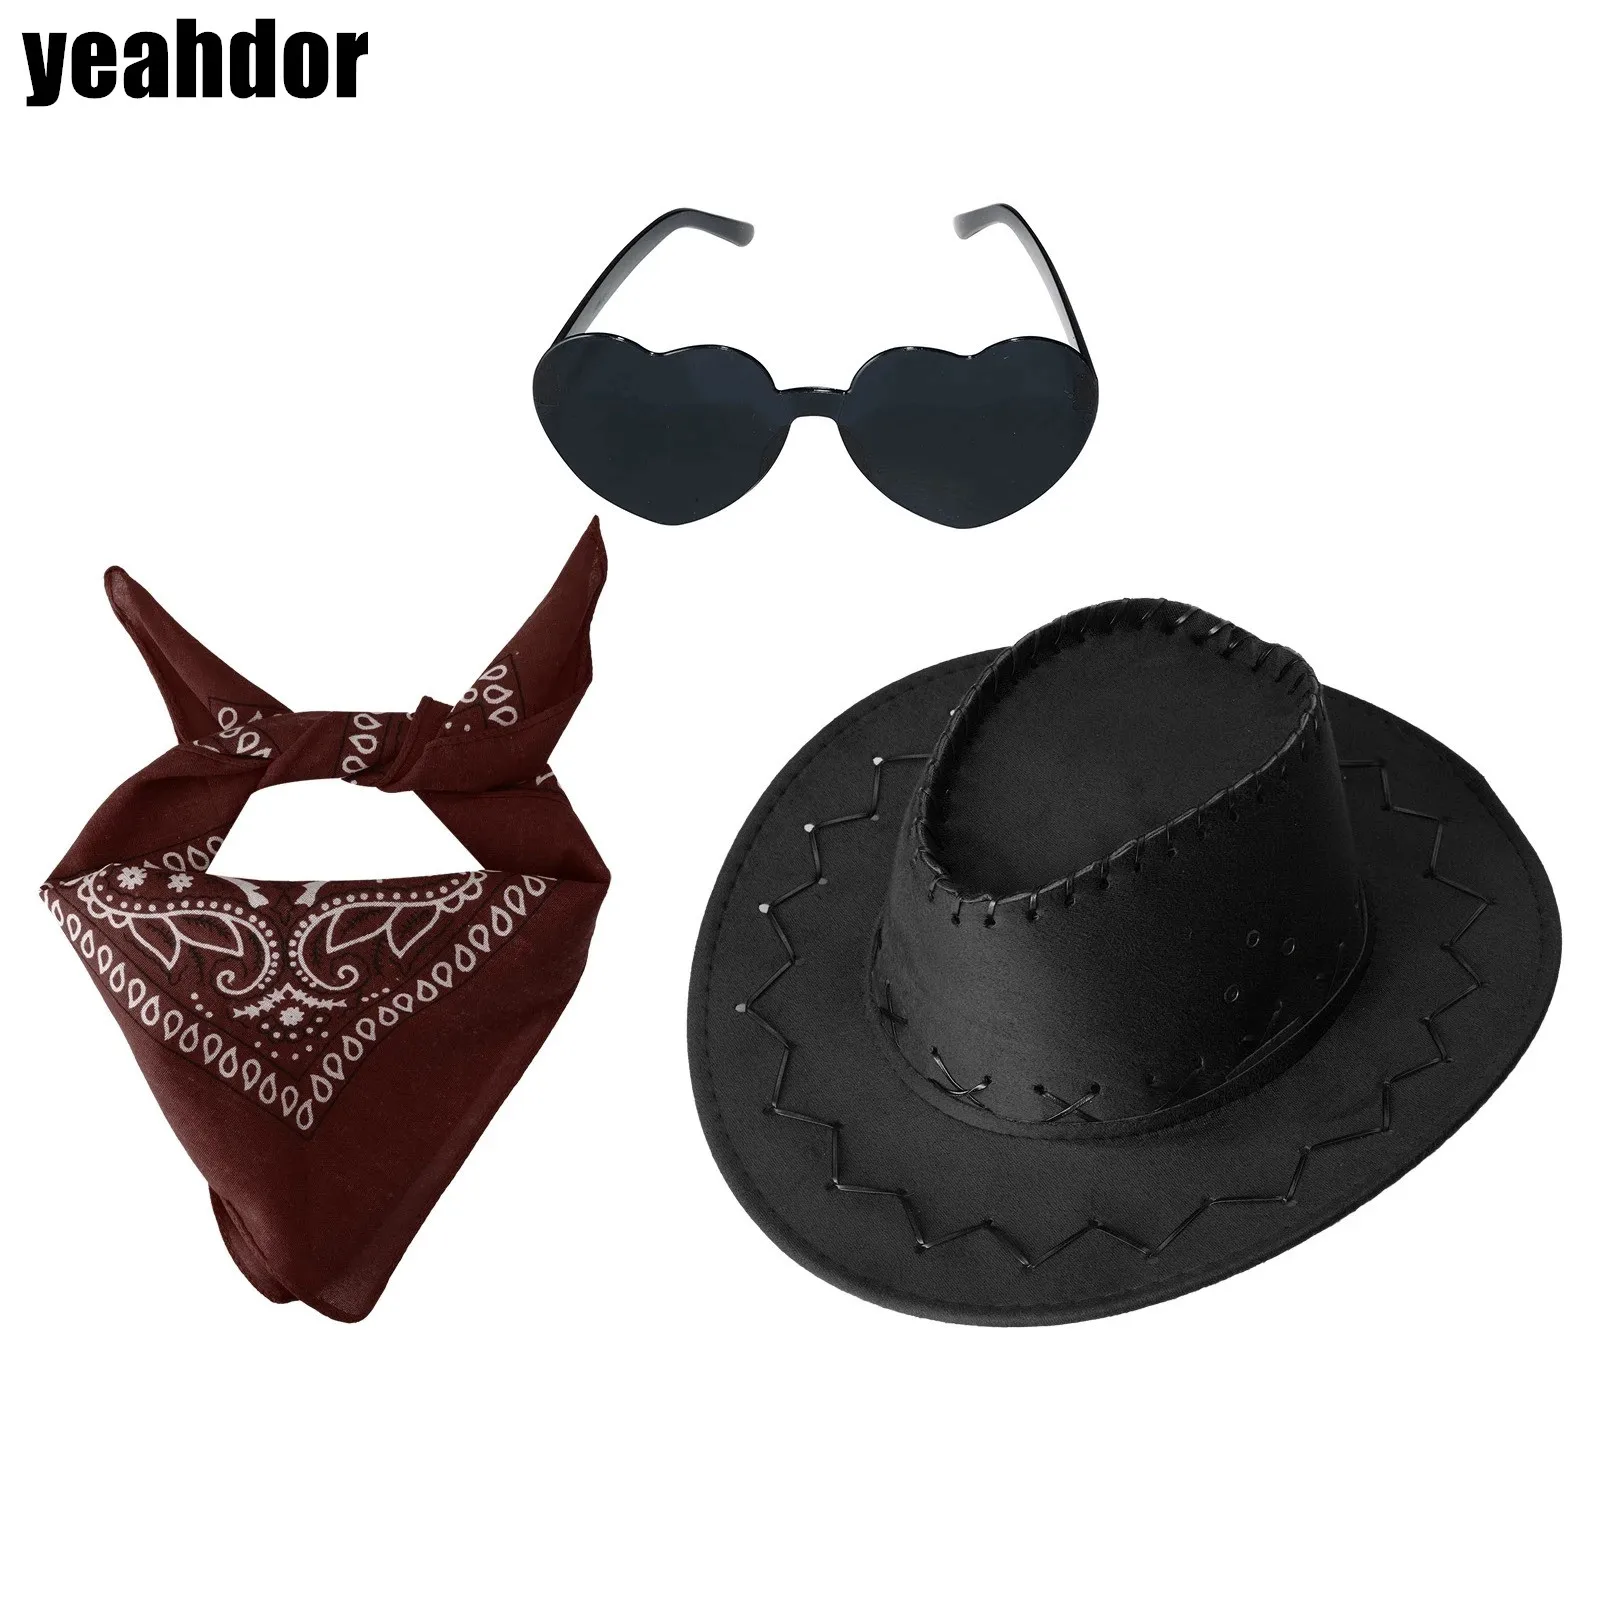 

Kids Western Cowboy Cowgirl Costume Accessory Drawstring Felt Hat Heart-shaped Lens Sunglass And Bandana for Halloween Cosplay